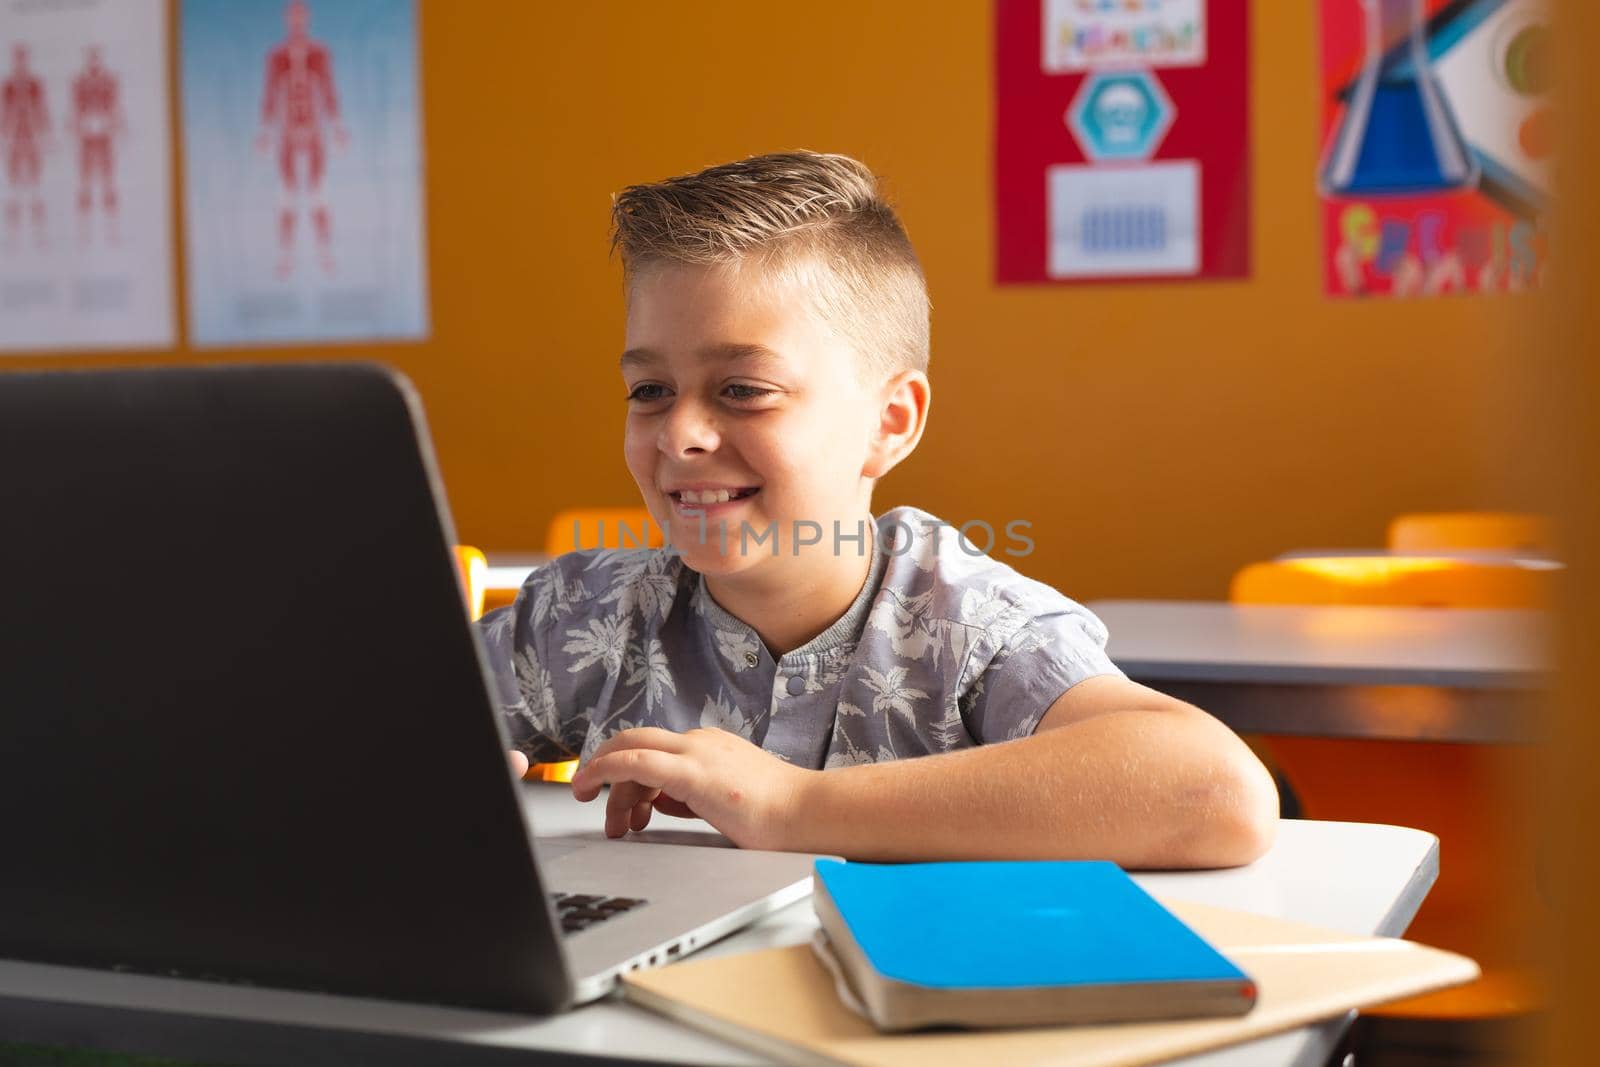 Caucasian boy sitting at a desk in classroom using laptop and smiling. childhood, technology and education at elementary school.